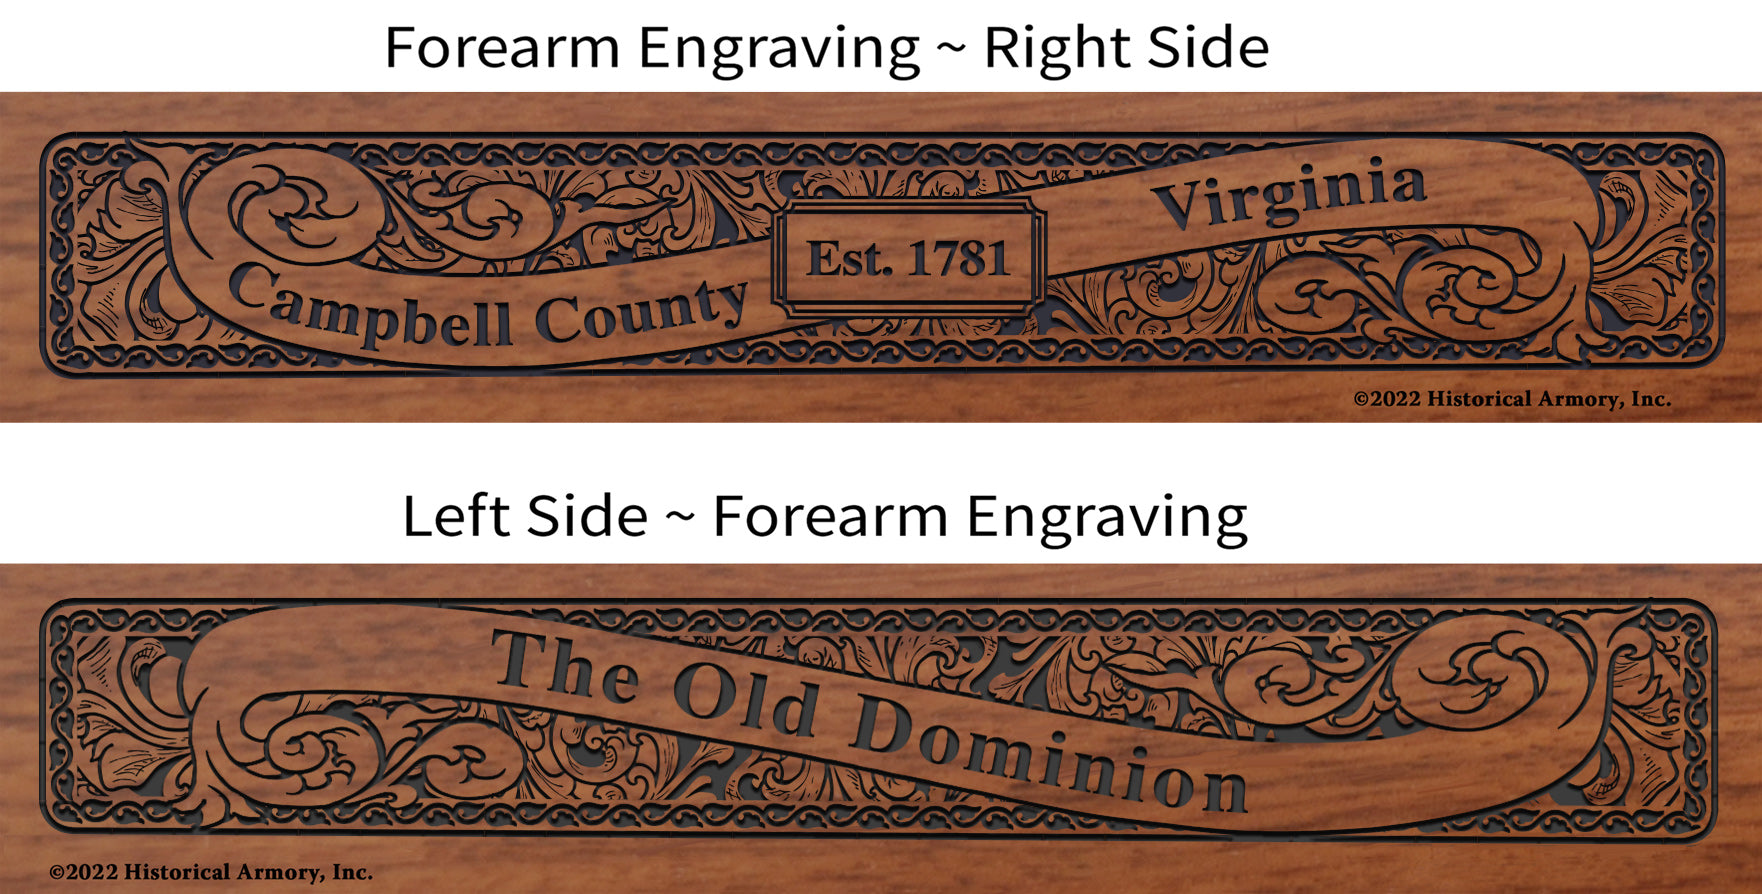 Campbell County Virginia Engraved Rifle Forearm